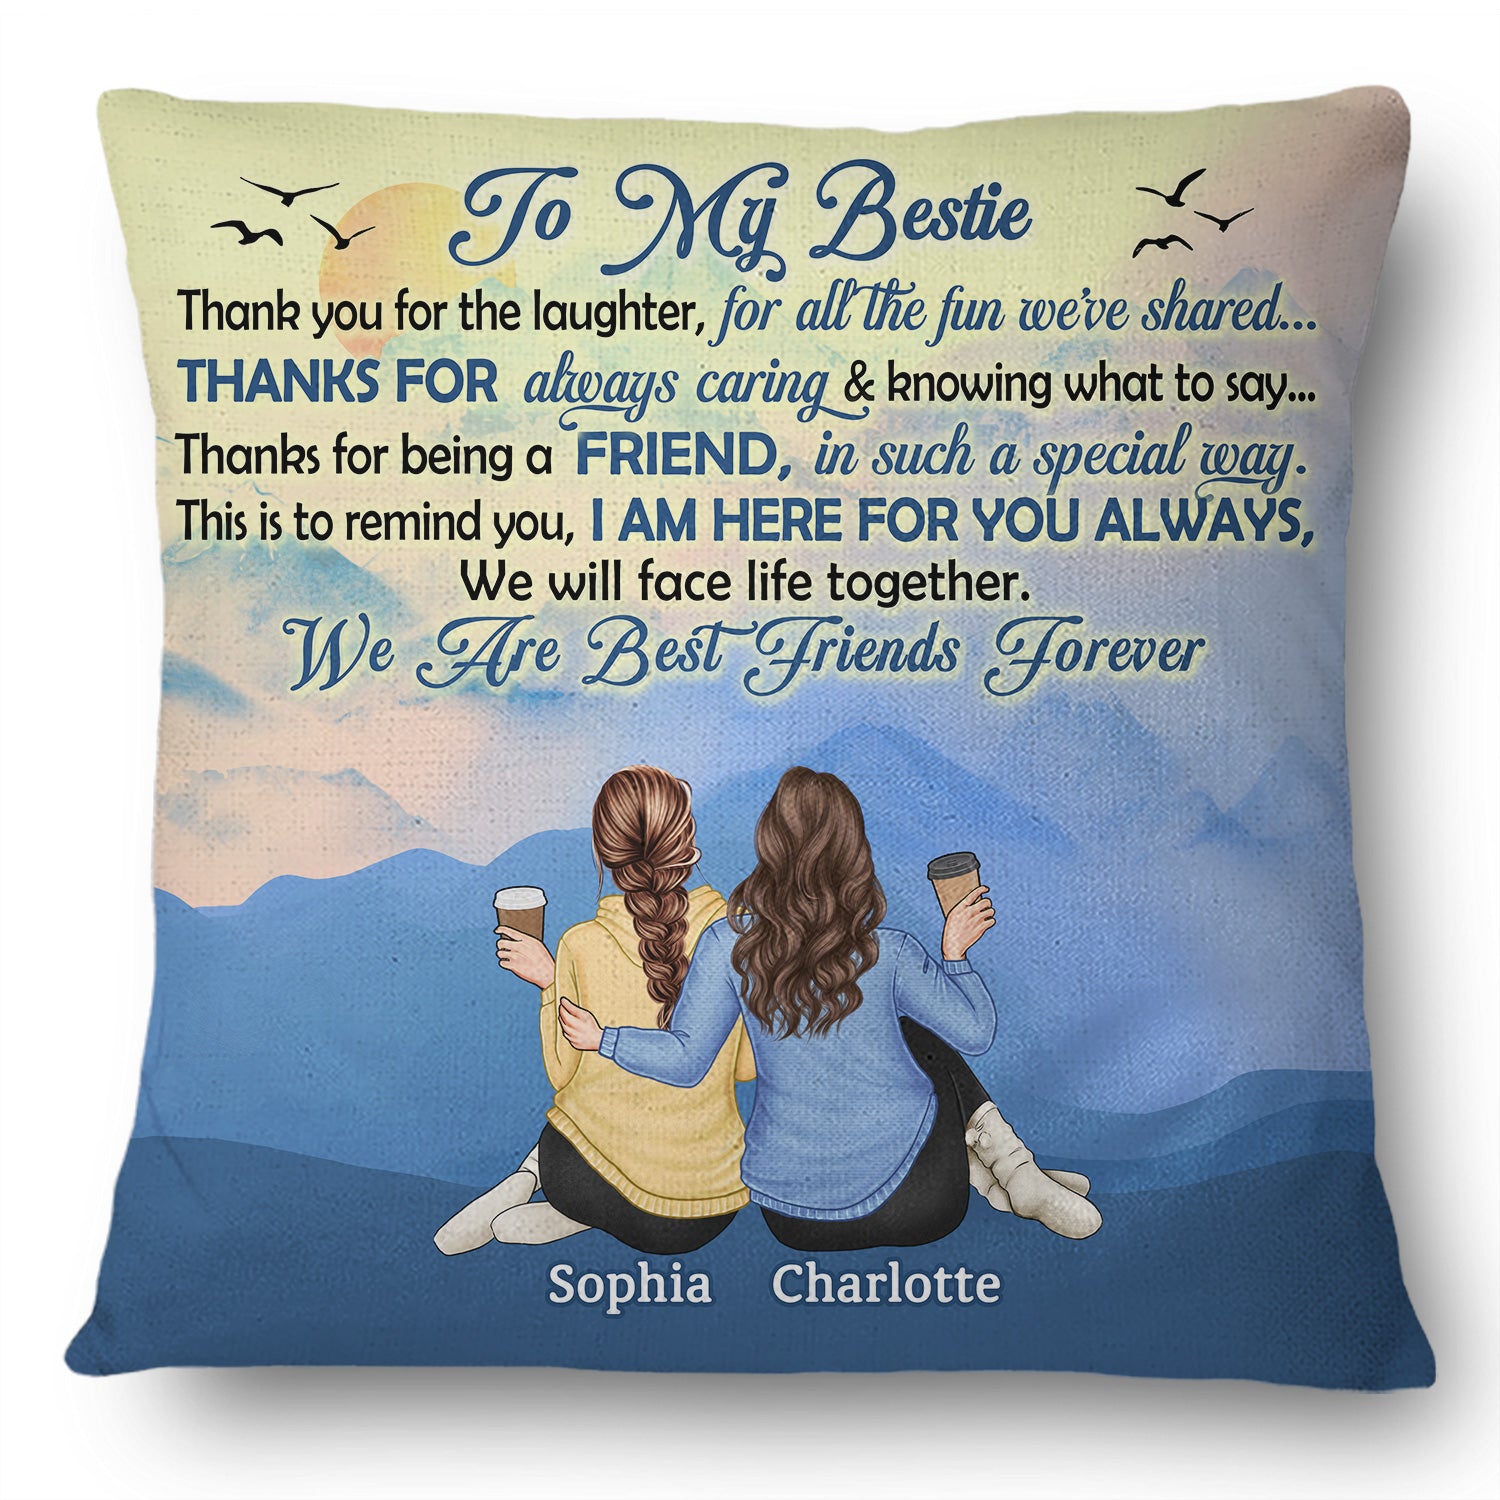 Thank You For The Laughter For All The Fun We Share Besties - Gift For Best Friends - Personalized Custom Pillow